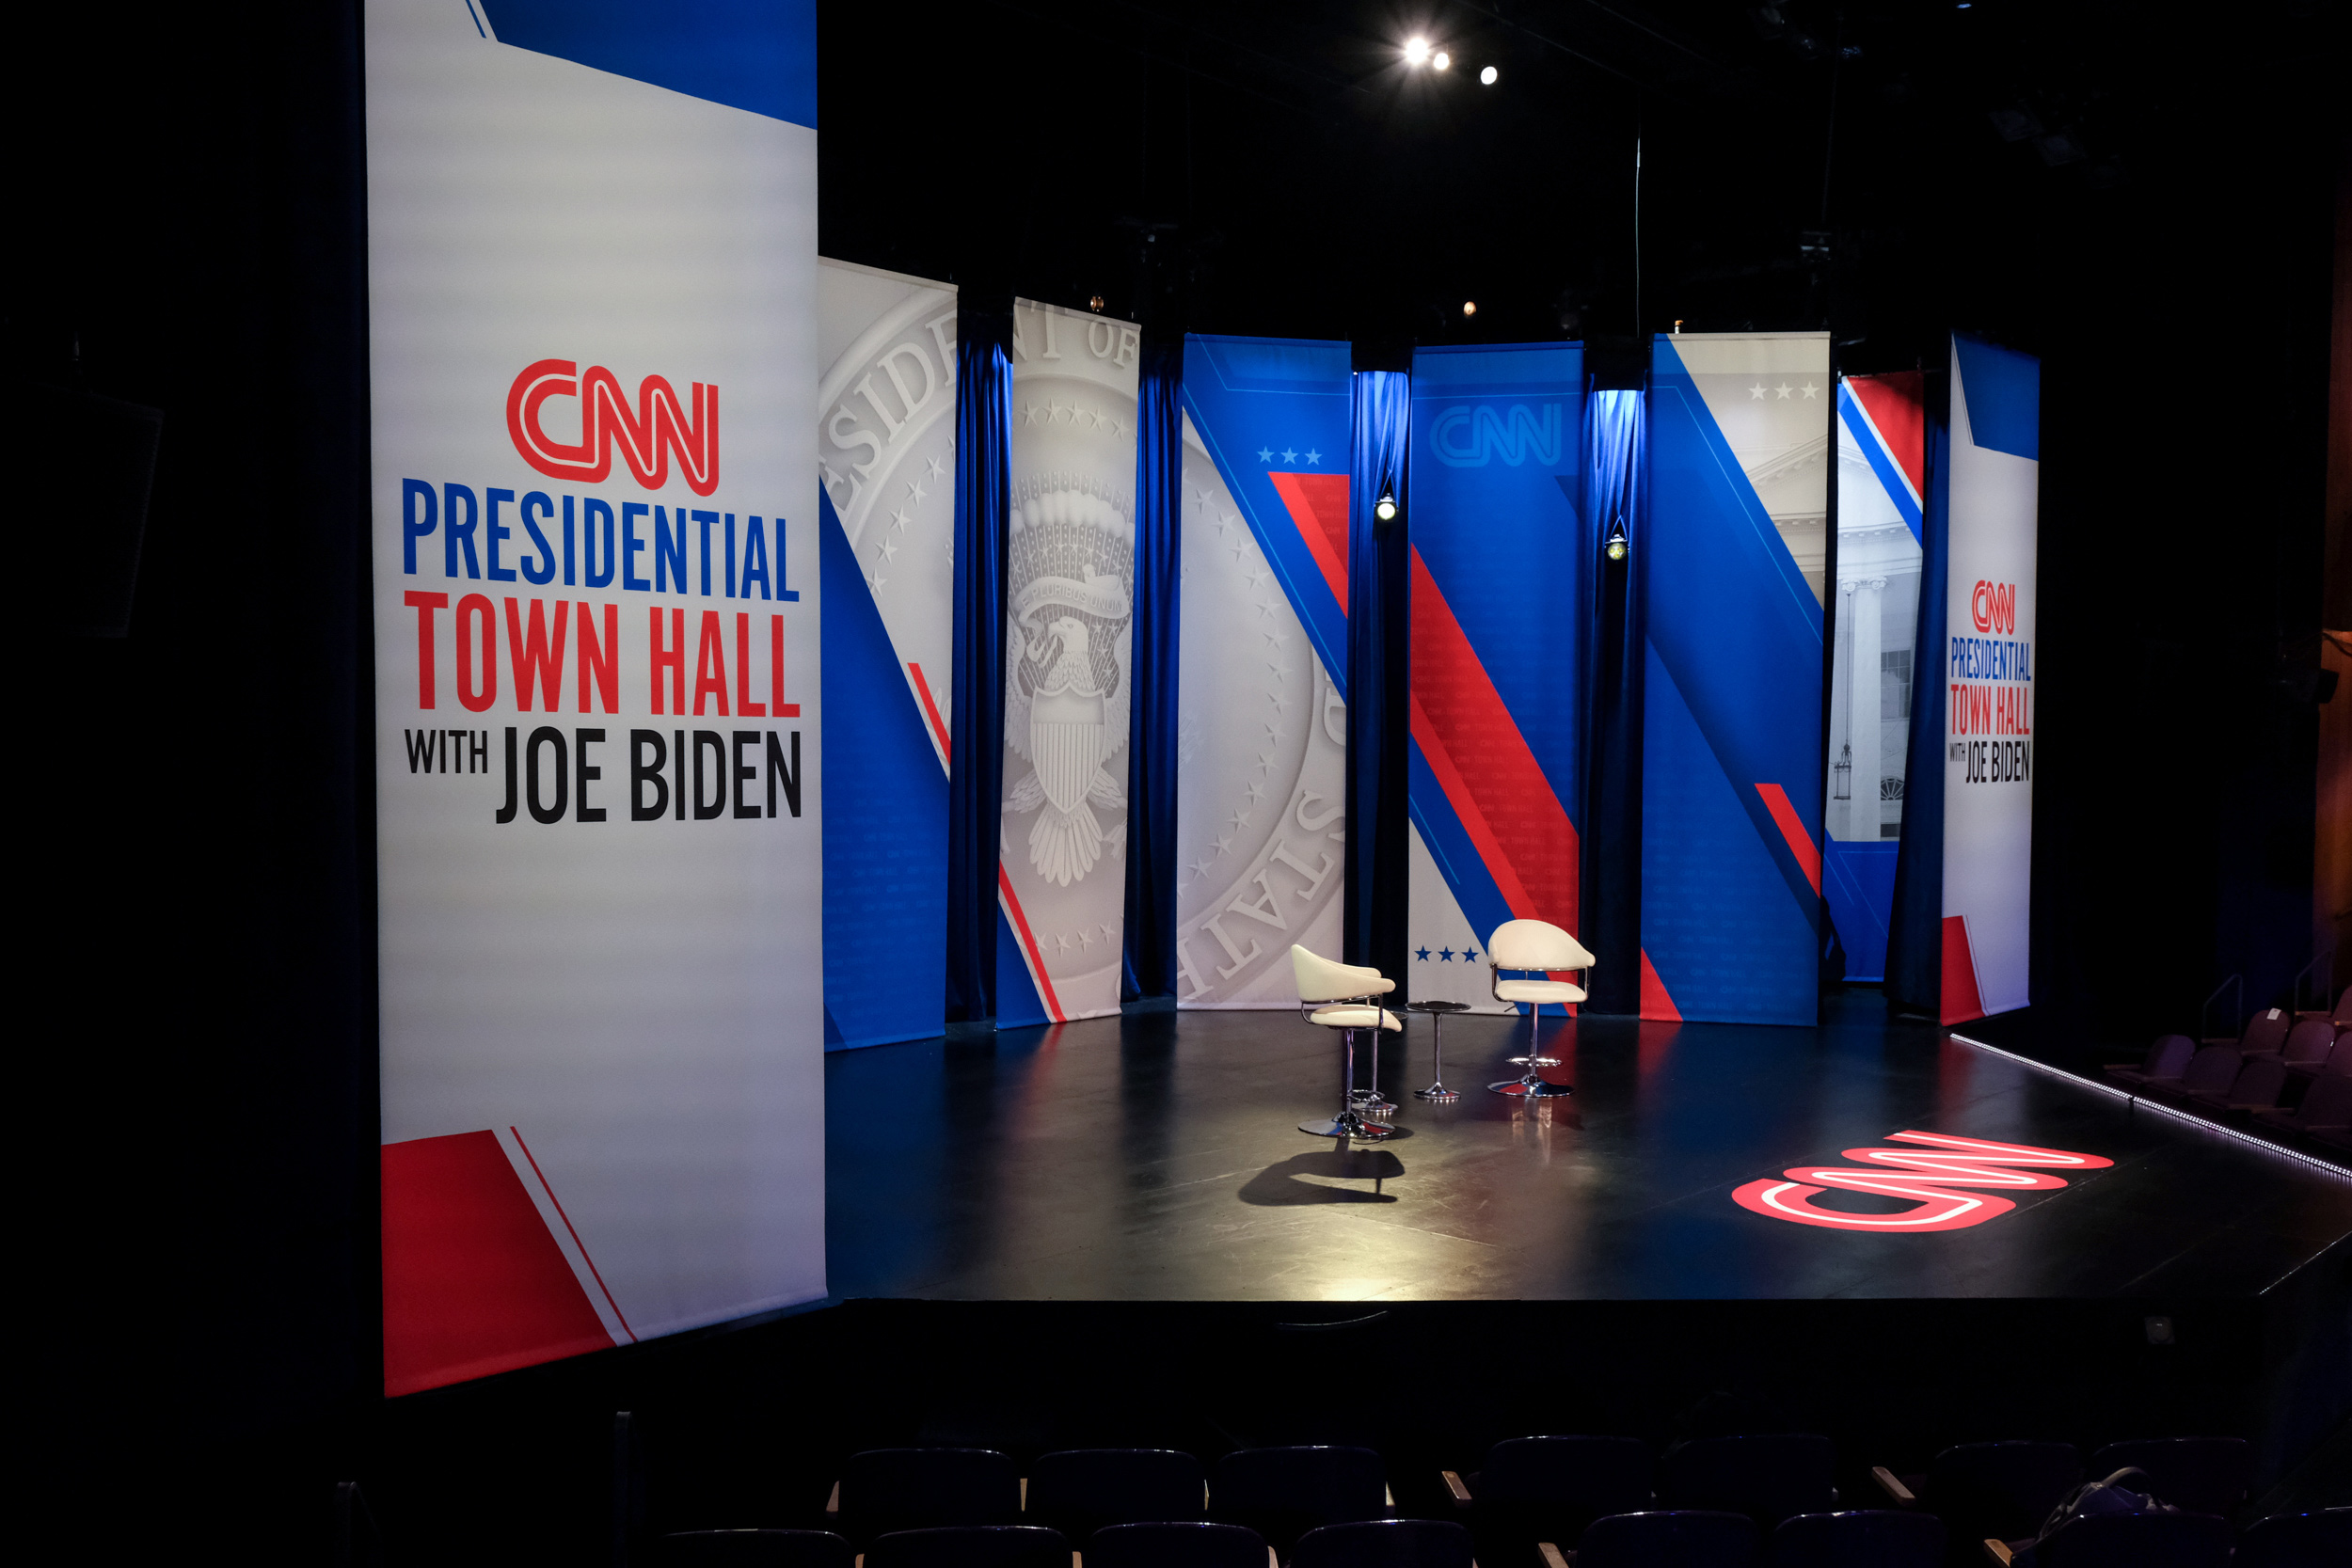 The stage is seen ahead of CNN's Presidential Town Hall with Joe Biden in Baltimore, Maryland, on October 21, 2021.